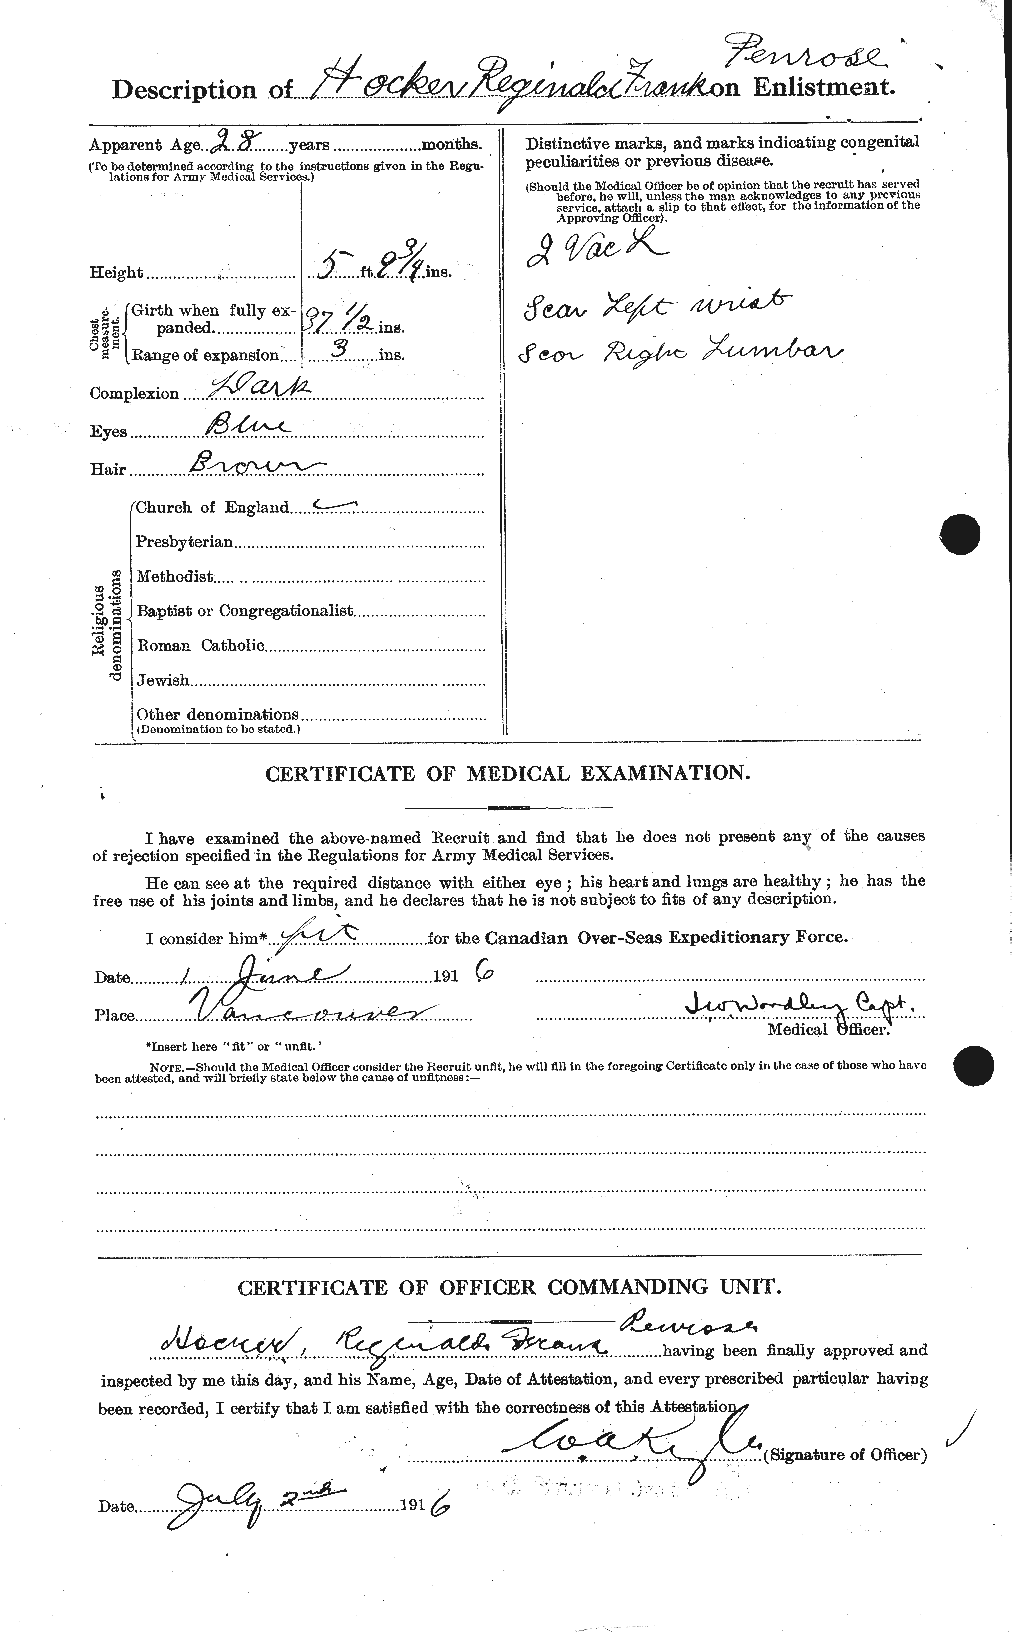 Personnel Records of the First World War - CEF 397682b